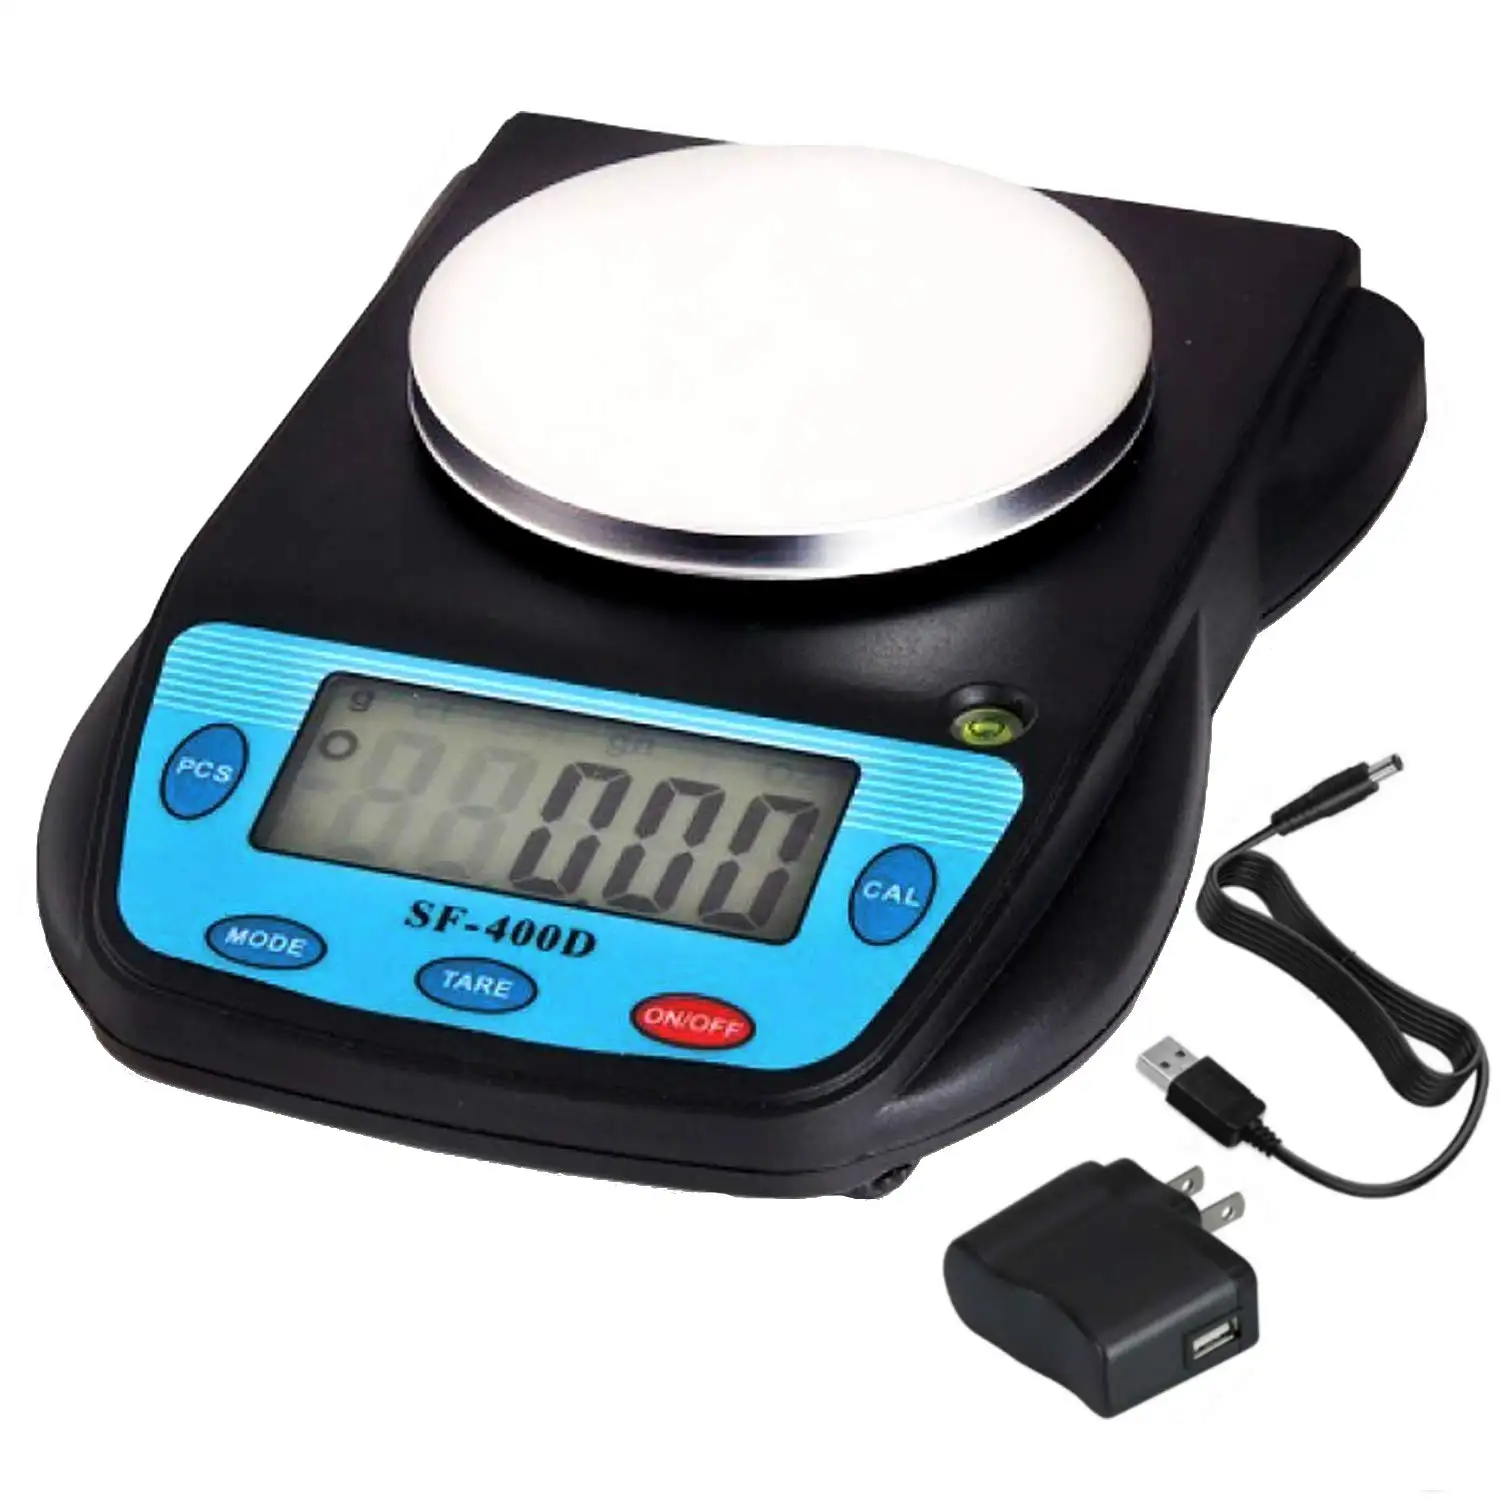 SF-400D 600g/0.01g digital lab analytical electronic weighing balance scale